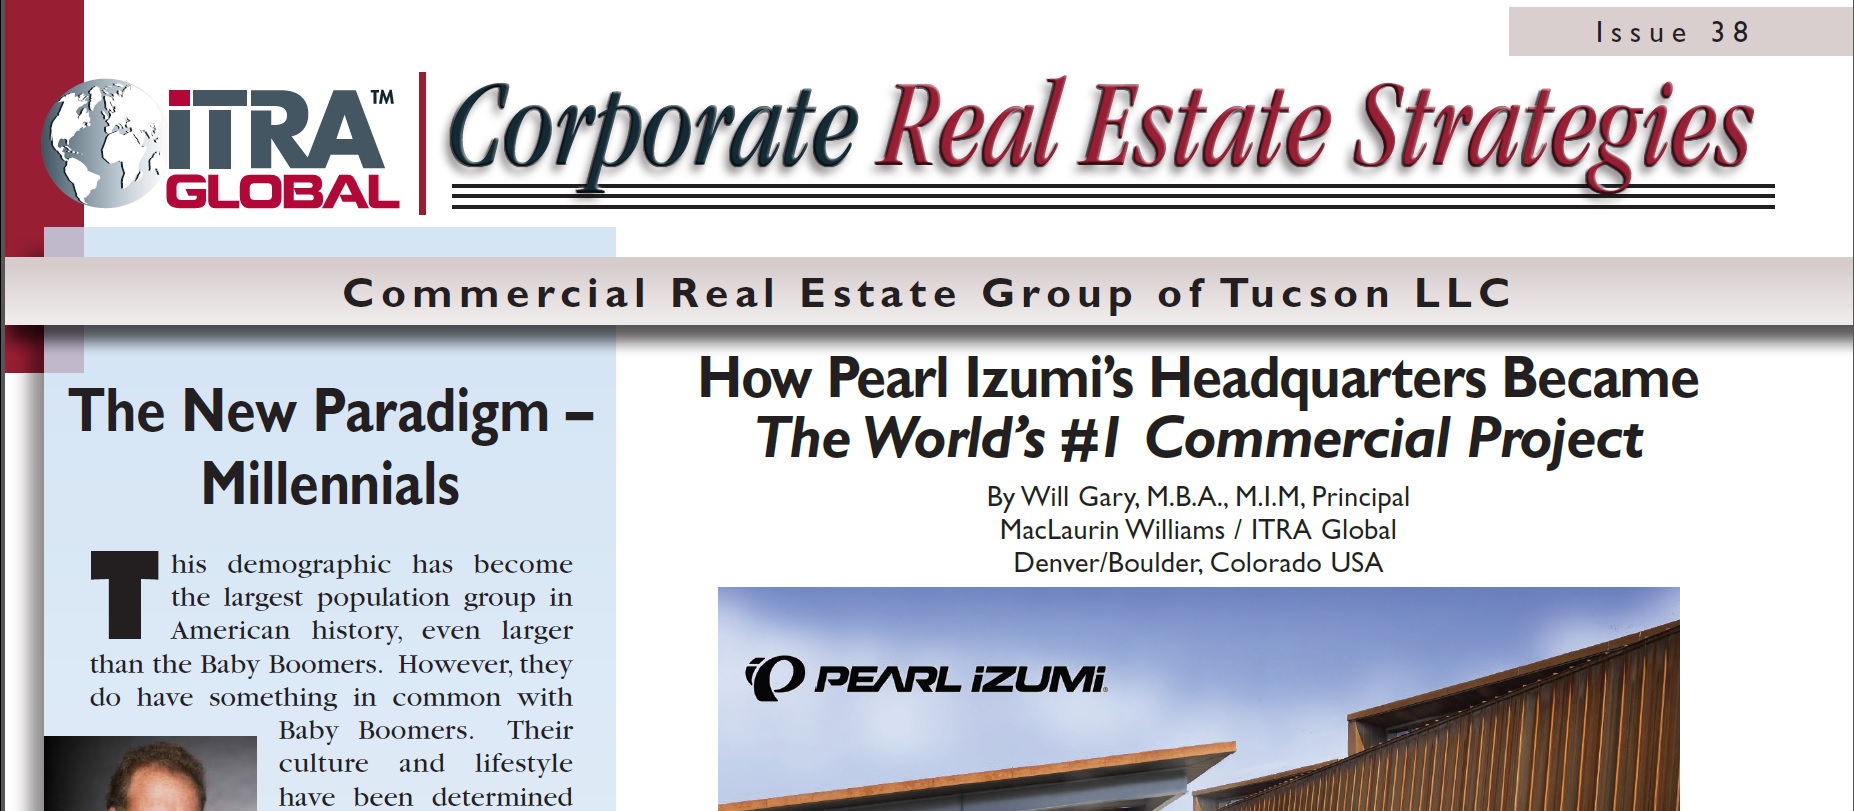 ITRA Global-CREG Tucson newsletter number 38